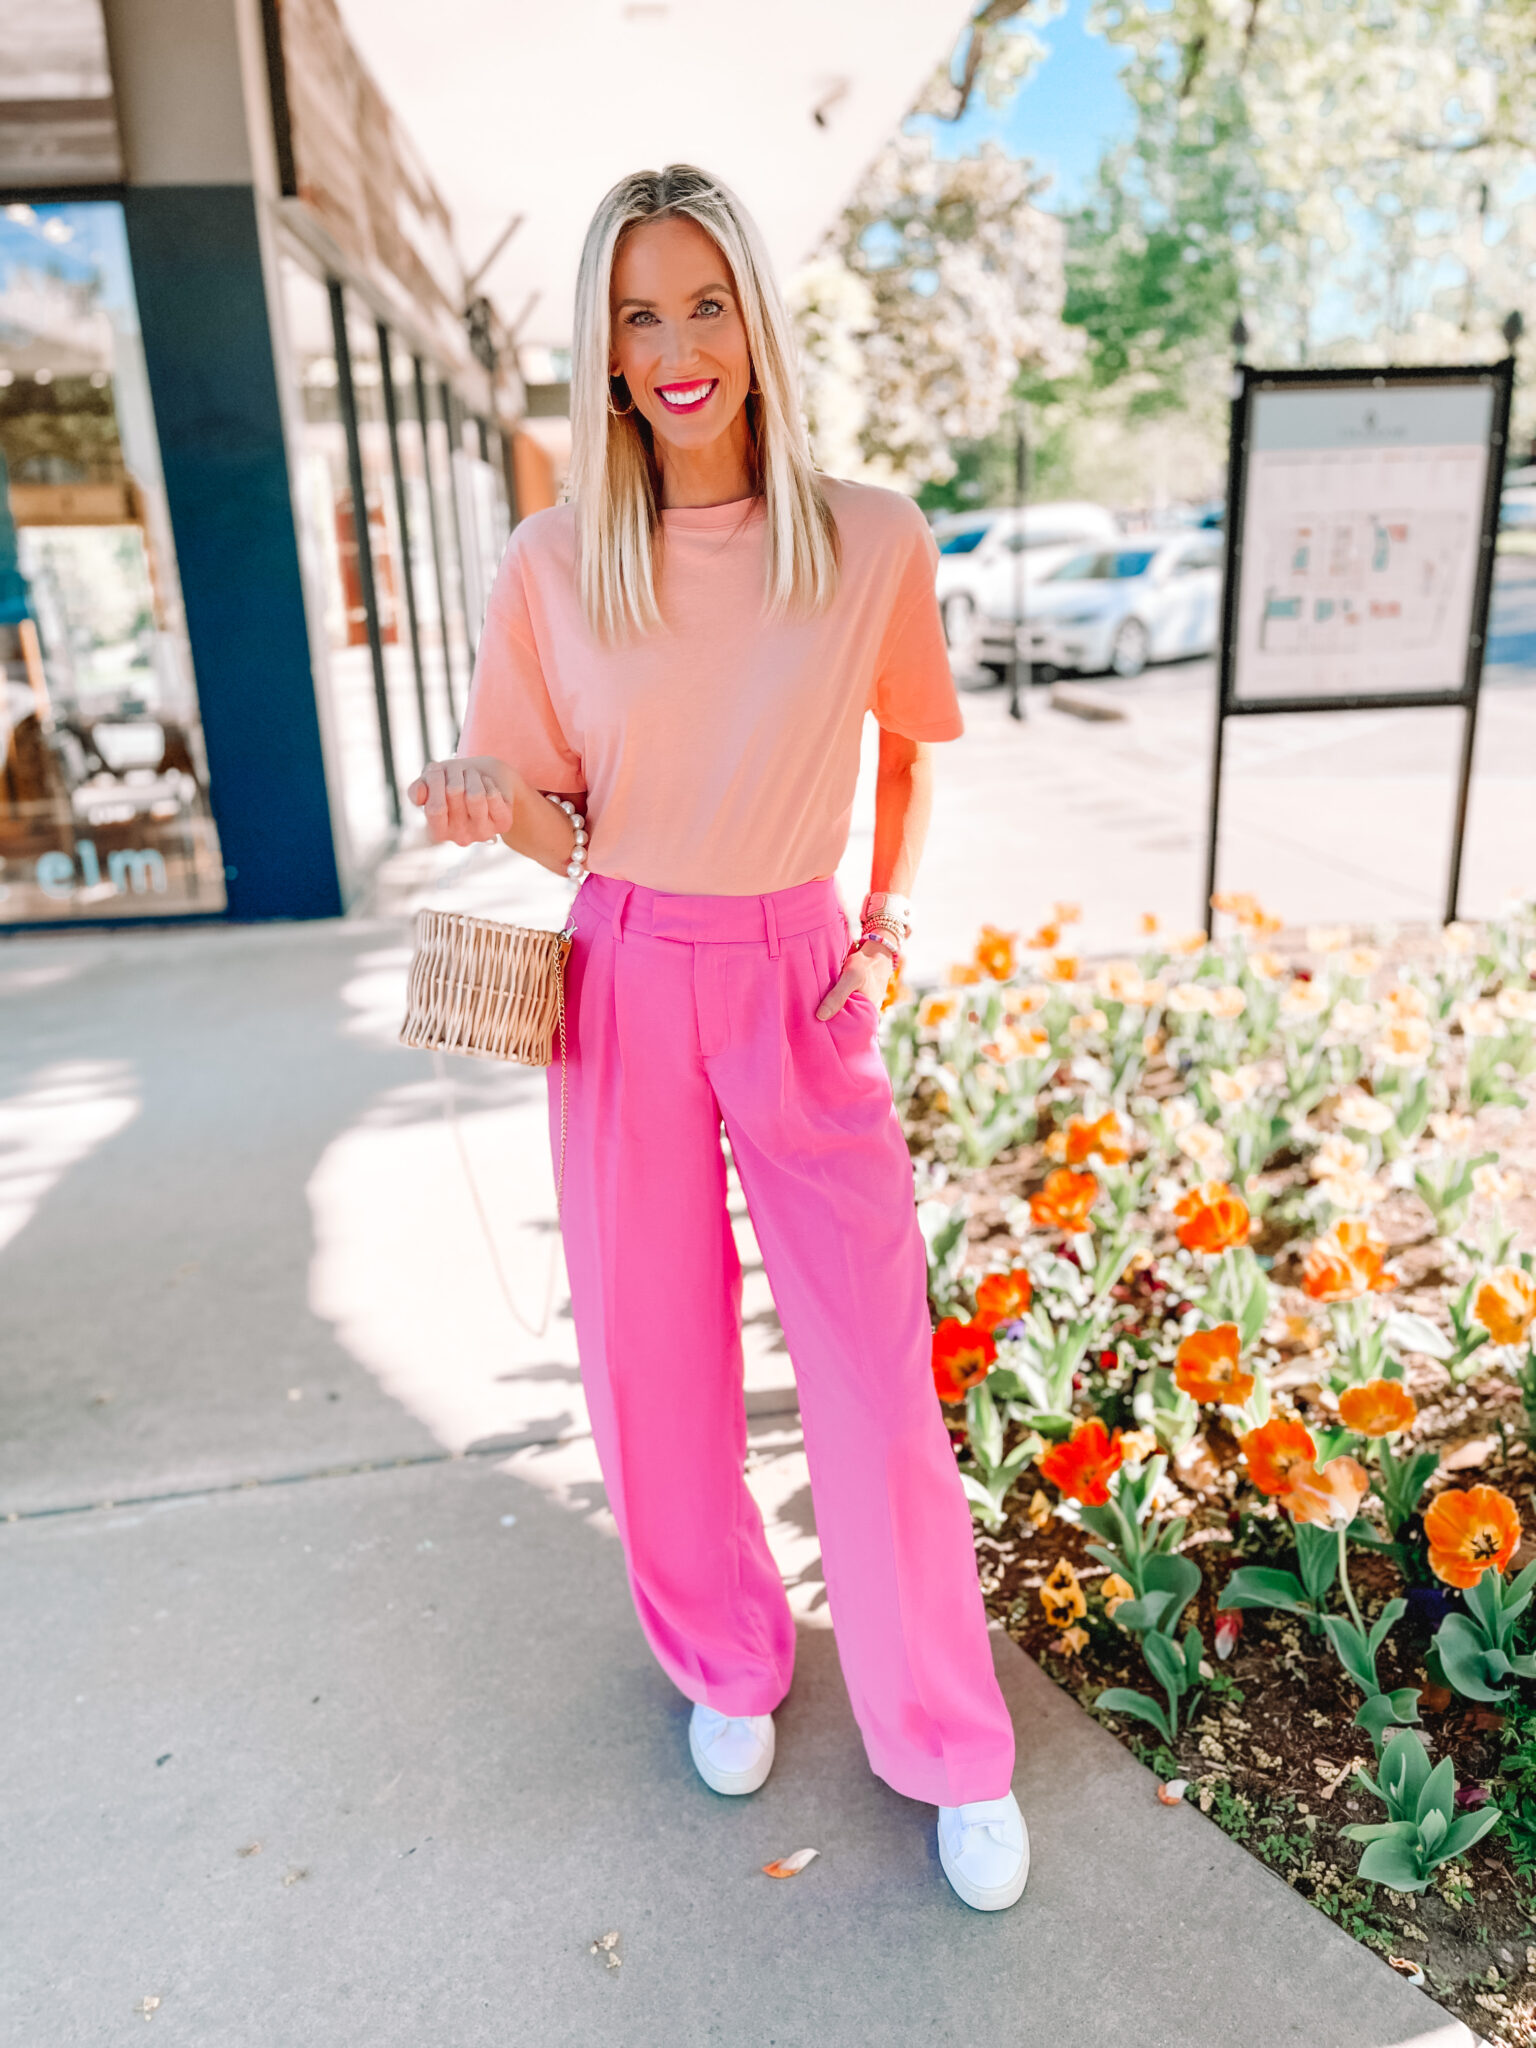 8 Bold Outfit Color Combinations To Try - Straight A Style